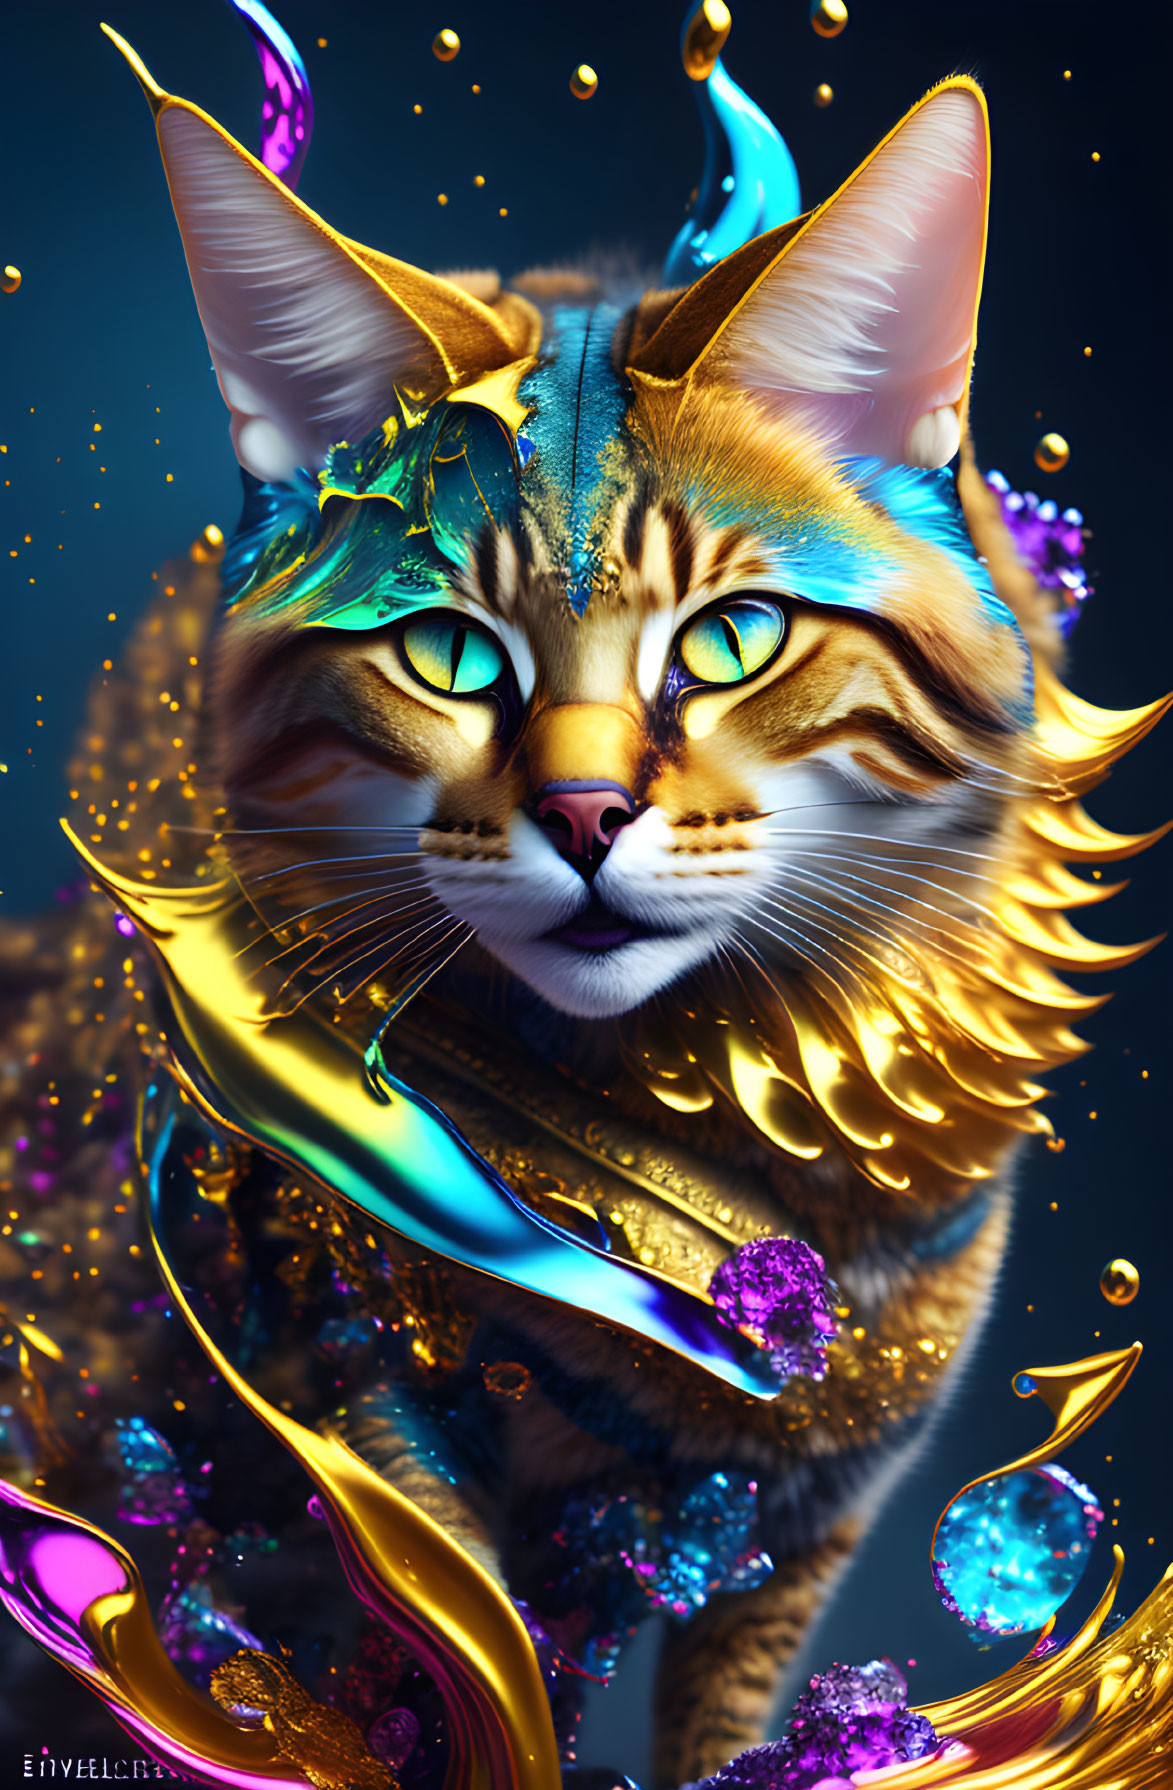 The Golden Tabaxi of Unfathomable